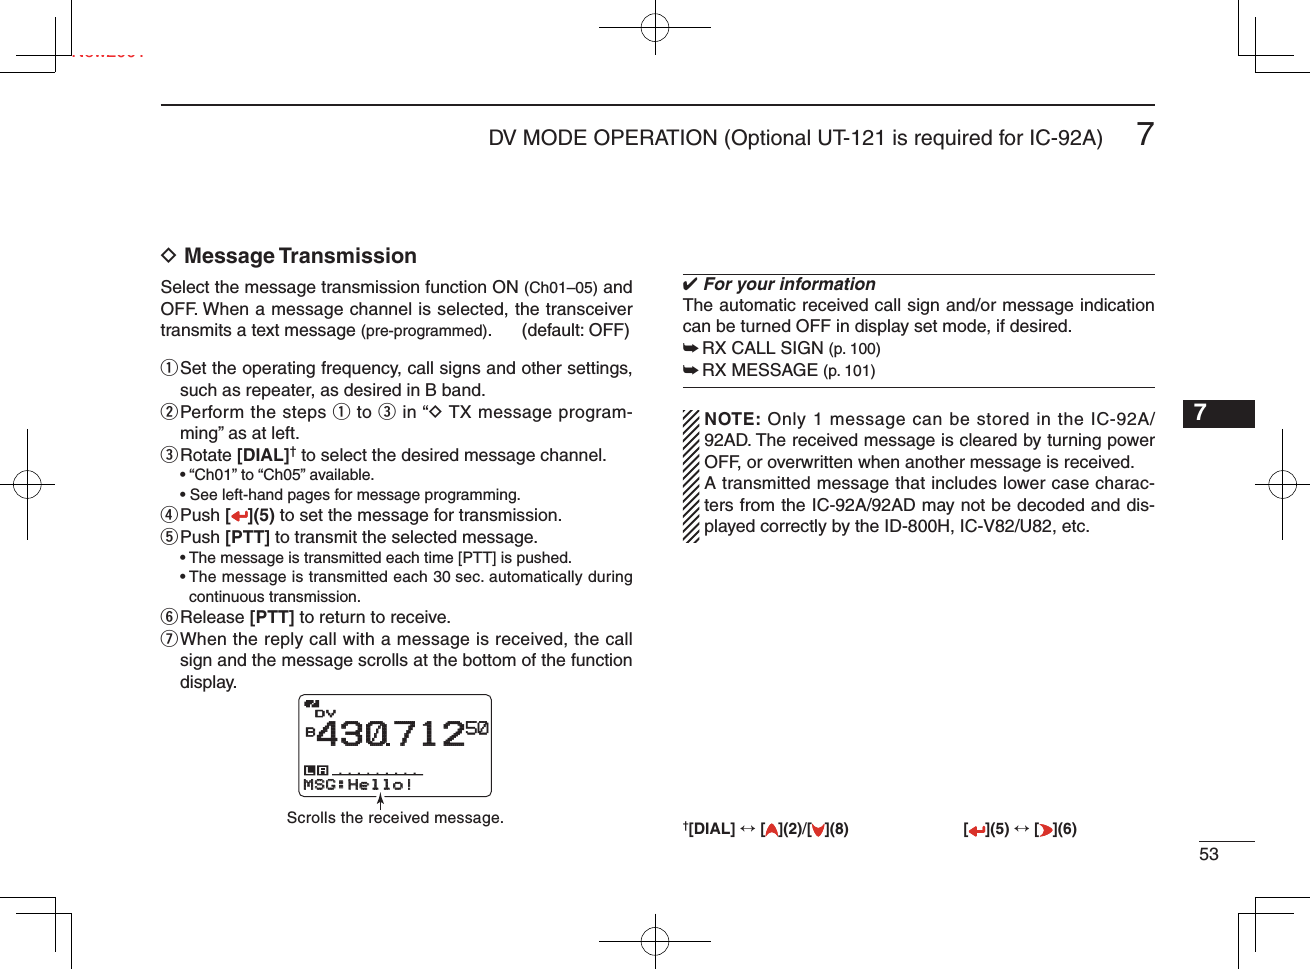 537DV MODE OPERATION (Optional UT-121 is required for IC-92A)New20017D Message TransmissionSelect the message transmission function ON (Ch01–05) and OFF. When a message channel is selected, the transceiver transmits a text message (pre-programmed). (default: OFF) q  Set the operating frequency, call signs and other settings, such as repeater, as desired in B band.w  Perform the steps q to e in “D TX message program-ming” as at left.e  Rotate [DIAL]† to select the desired message channel.  • “Ch01” to “Ch05” available.  • See left-hand pages for message programming.r  Push [ ](5) to set the message for transmission.t  Push [PTT] to transmit the selected message.  • The message is transmitted each time [PTT] is pushed. •  The message is transmitted each 30 sec. automatically during continuous transmission.y Release  [PTT] to return to receive.u  When the reply call with a message is received, the call sign and the message scrolls at the bottom of the function display.✔ For your informationThe automatic received call sign and/or message indication can be turned OFF in display set mode, if desired.➥ RX CALL SIGN (p. 100)➥ RX MESSAGE (p. 101)  NOTE: Only 1 message can be stored in the IC-92A/92AD. The received message is cleared by turning power OFF, or overwritten when another message is received.  A transmitted message that includes lower case charac-ters from the IC-92A/92AD may not be decoded and dis-played correctly by the ID-800H, IC-V82/U82, etc.†[DIAL] ↔ [ ](2)/[](8) [ ](5) ↔ [ ](6)1234568910111213141516171819DVDVB43071250MSG:Hello!MSG:Hello!Scrolls the received message.